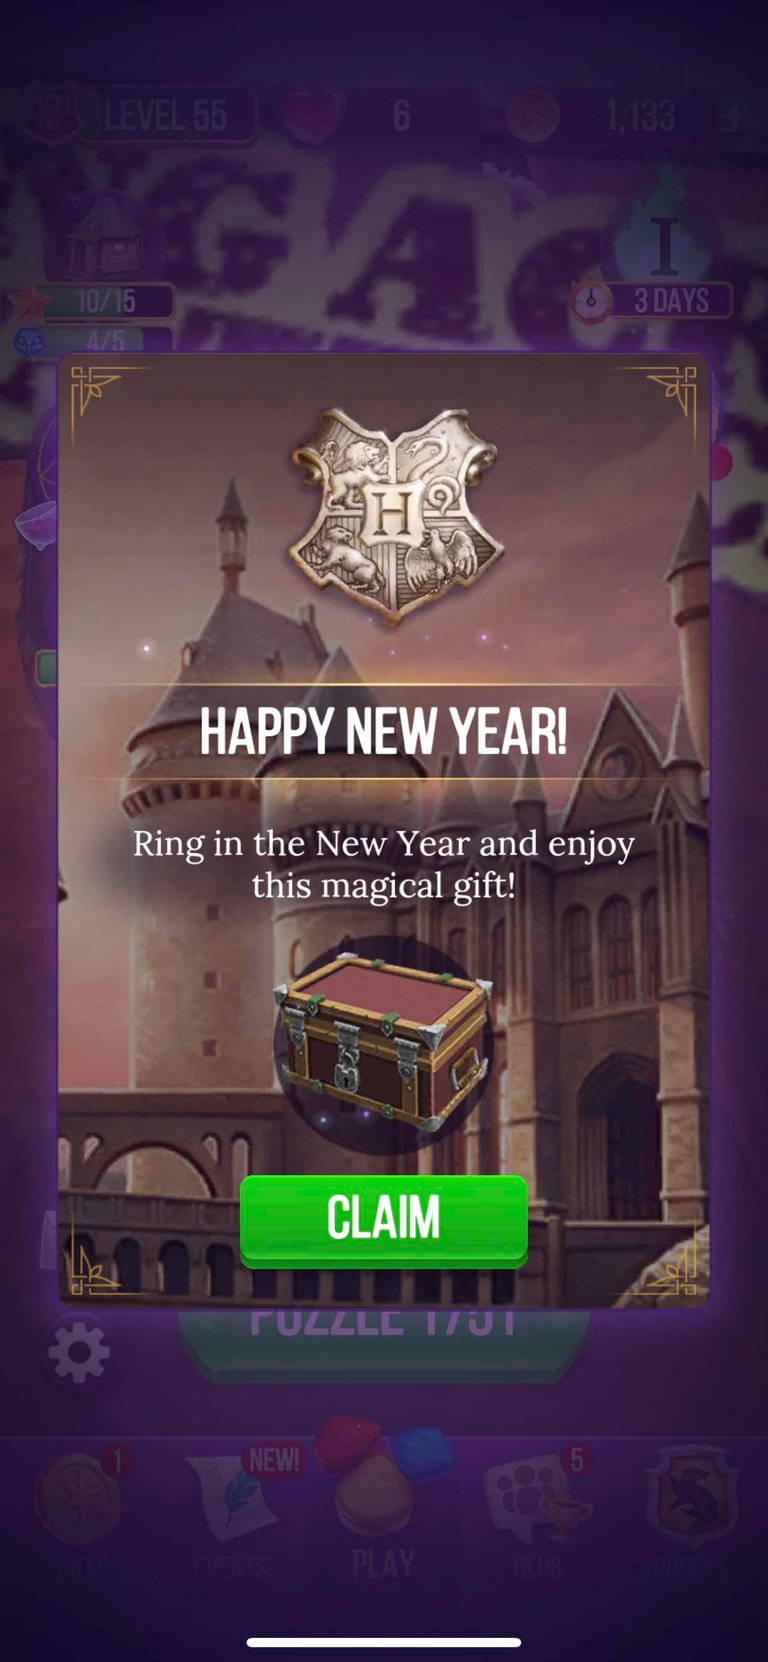 2023 Happy New Year Gift Harry Potter Game.jpg